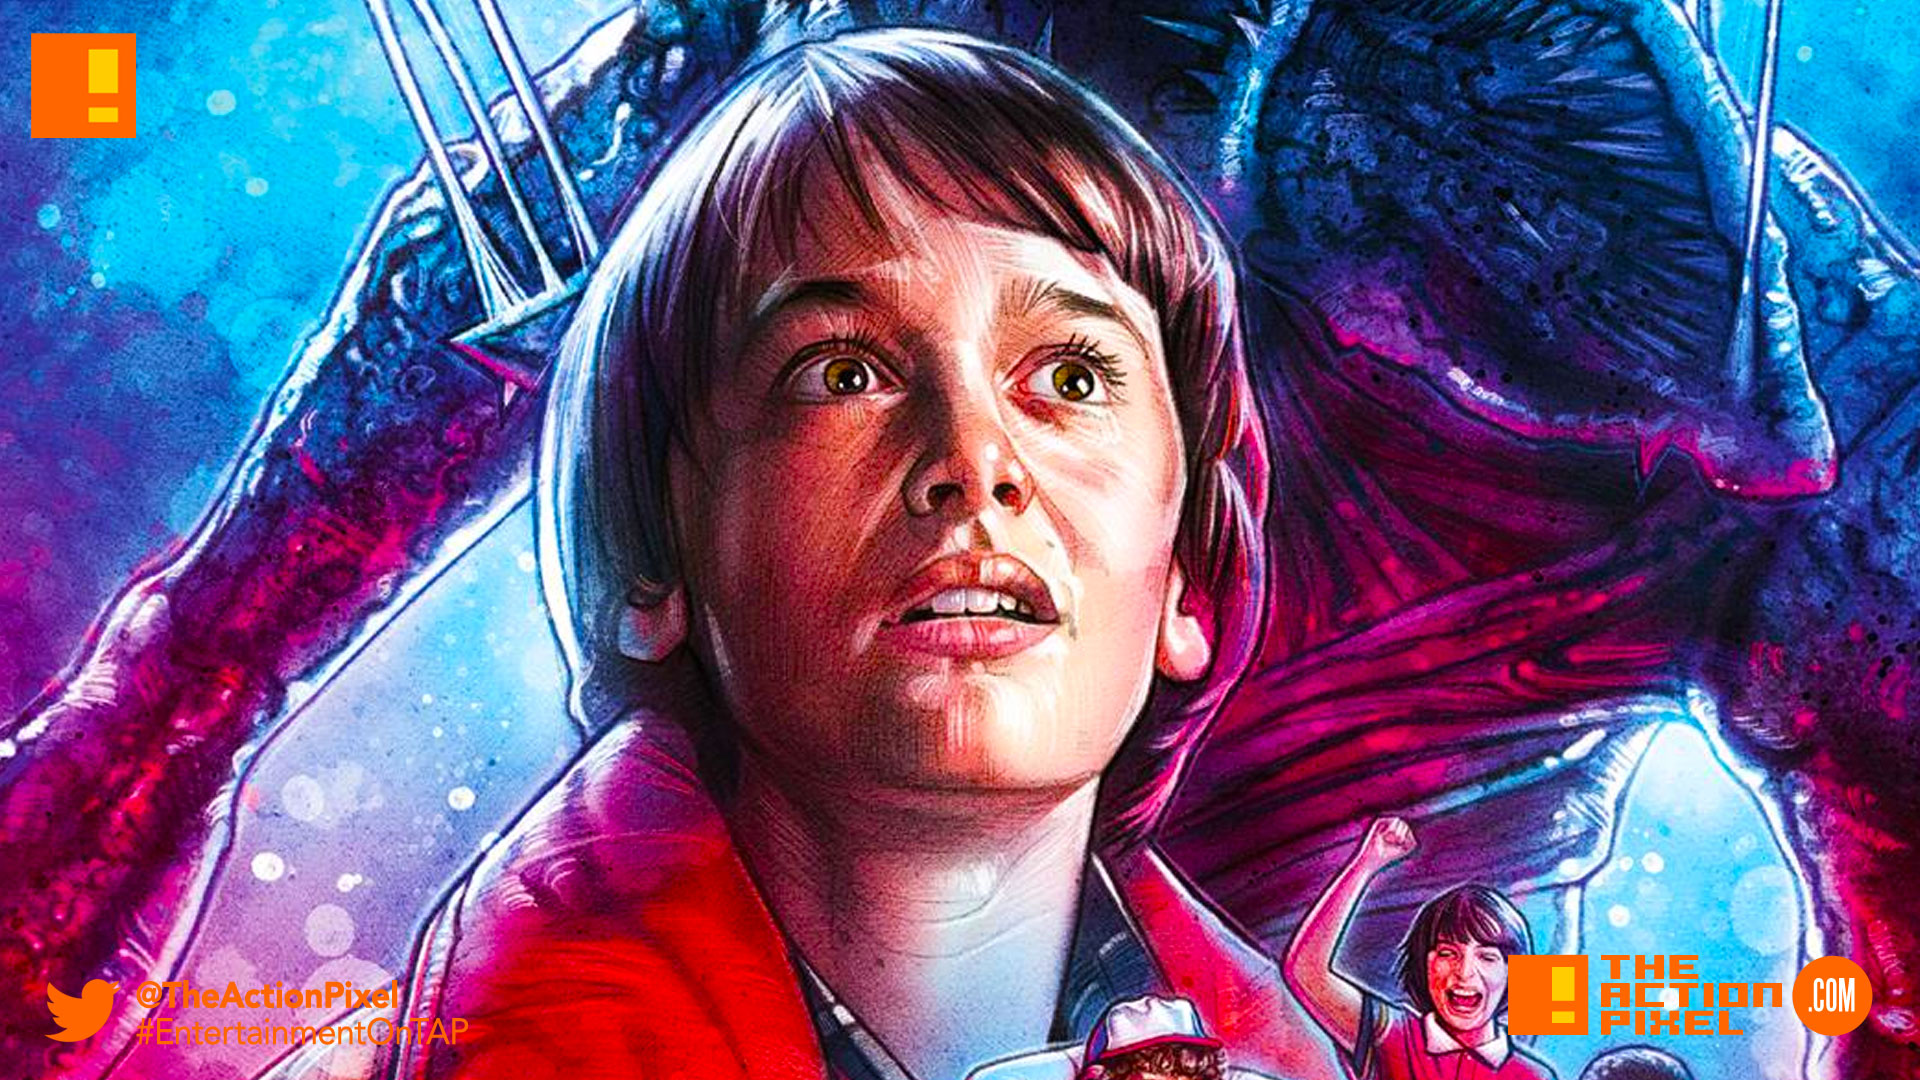 Kyle Lambert, Netflix, stranger things , stranger things 2, the action pixel, will ayer, comic book, dark horse comics, netflix series, dark horse, preview, panel art, demagorgon, eleven, el, L, the action pixel, entertainment on tap,Patrick Satterfield, Rafael Albuquerque